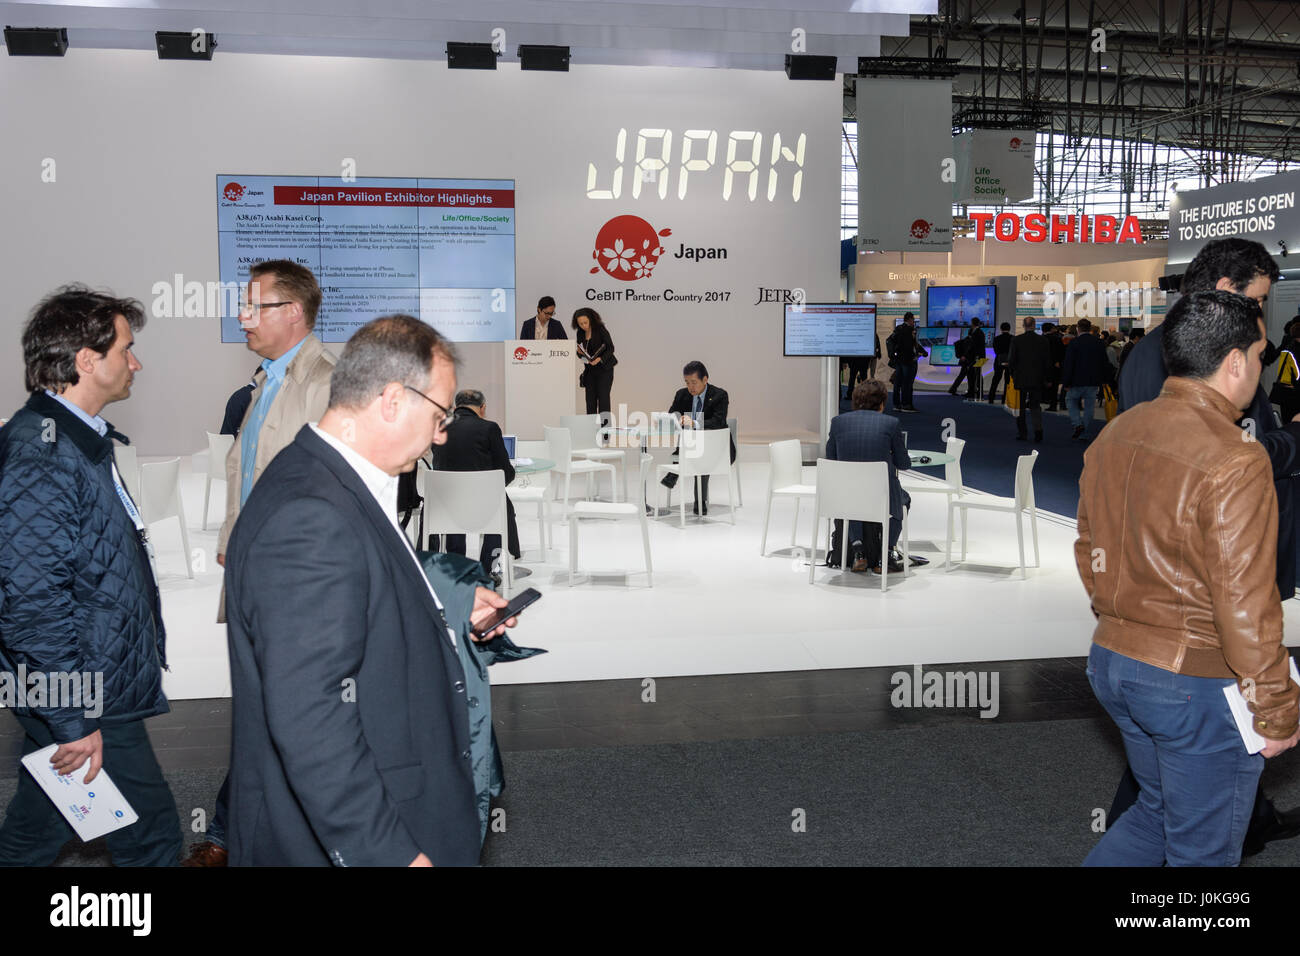 Hannover, Germany - March 22, 2017: View on a part of the Japan pavilion at CeBIT 2017 - Japan is the partner country in 2017. Stock Photo